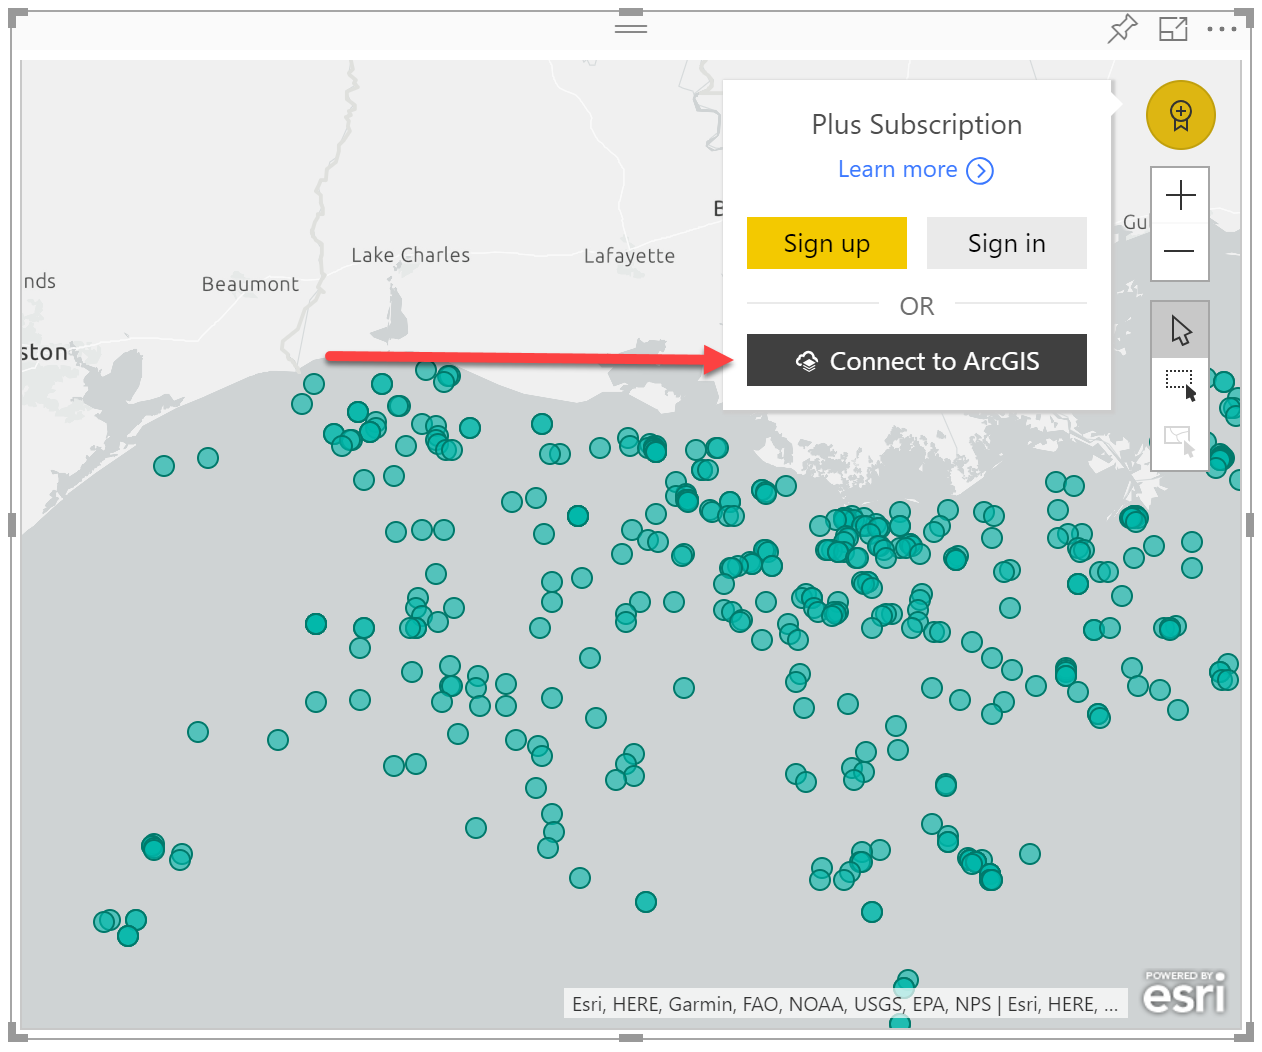 Esri Arcgis Online And Plus Subscription Organizational Purchase Are Now Available For Arcgis Maps For Power Bi Blog De Microsoft Power Bi Microsoft Power Bi